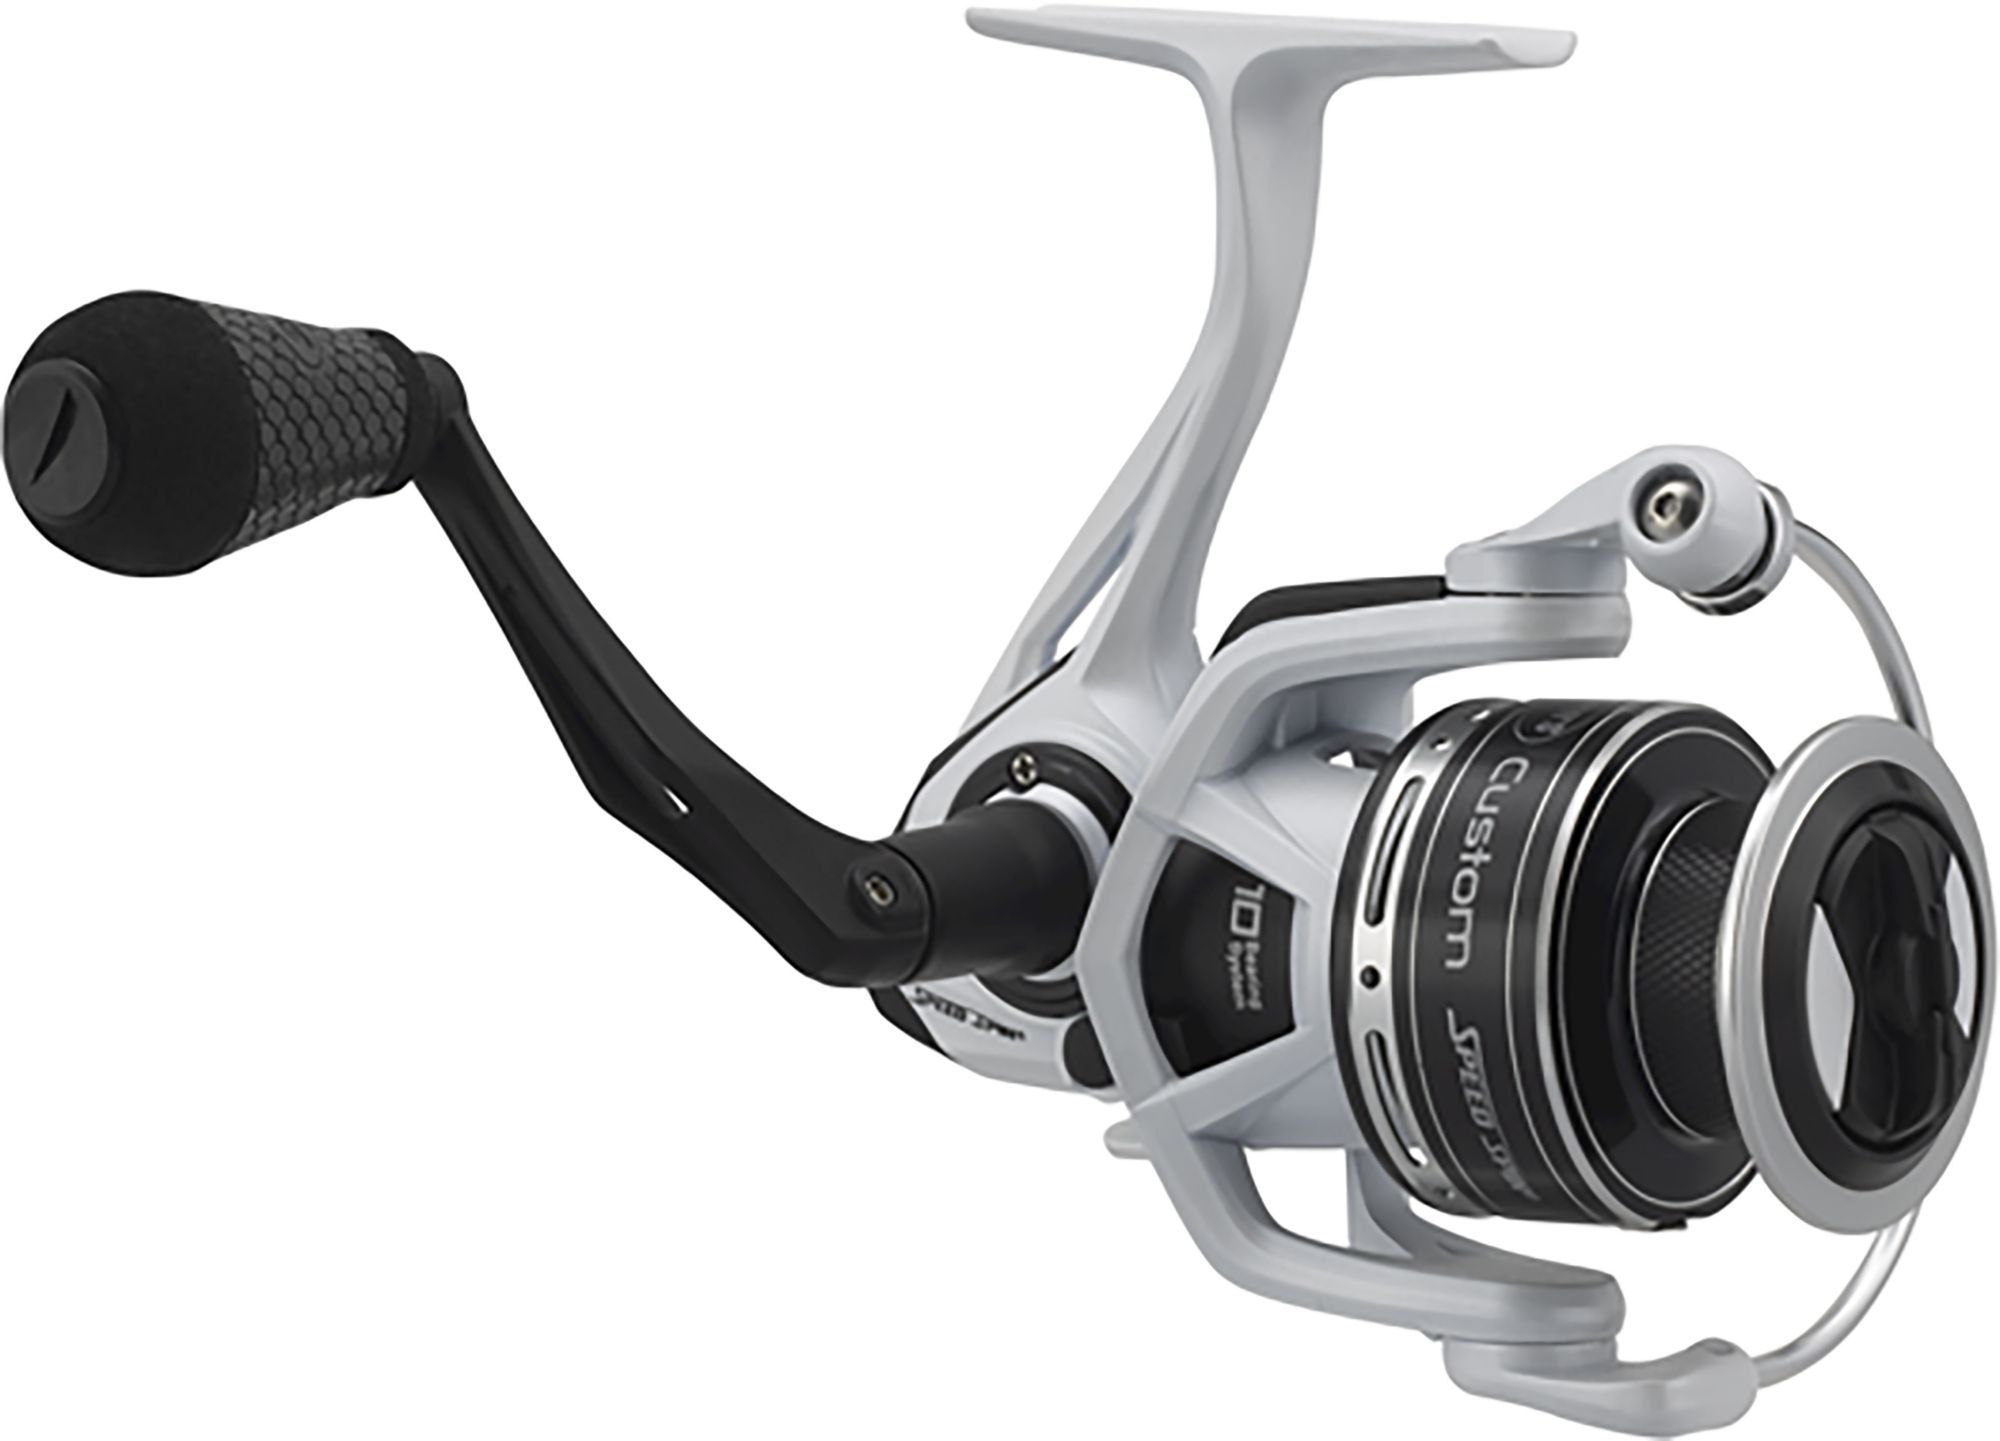 Photos - Other for Fishing Lew's Custom Spinning Reel 23LEWUCSTM100521SREE